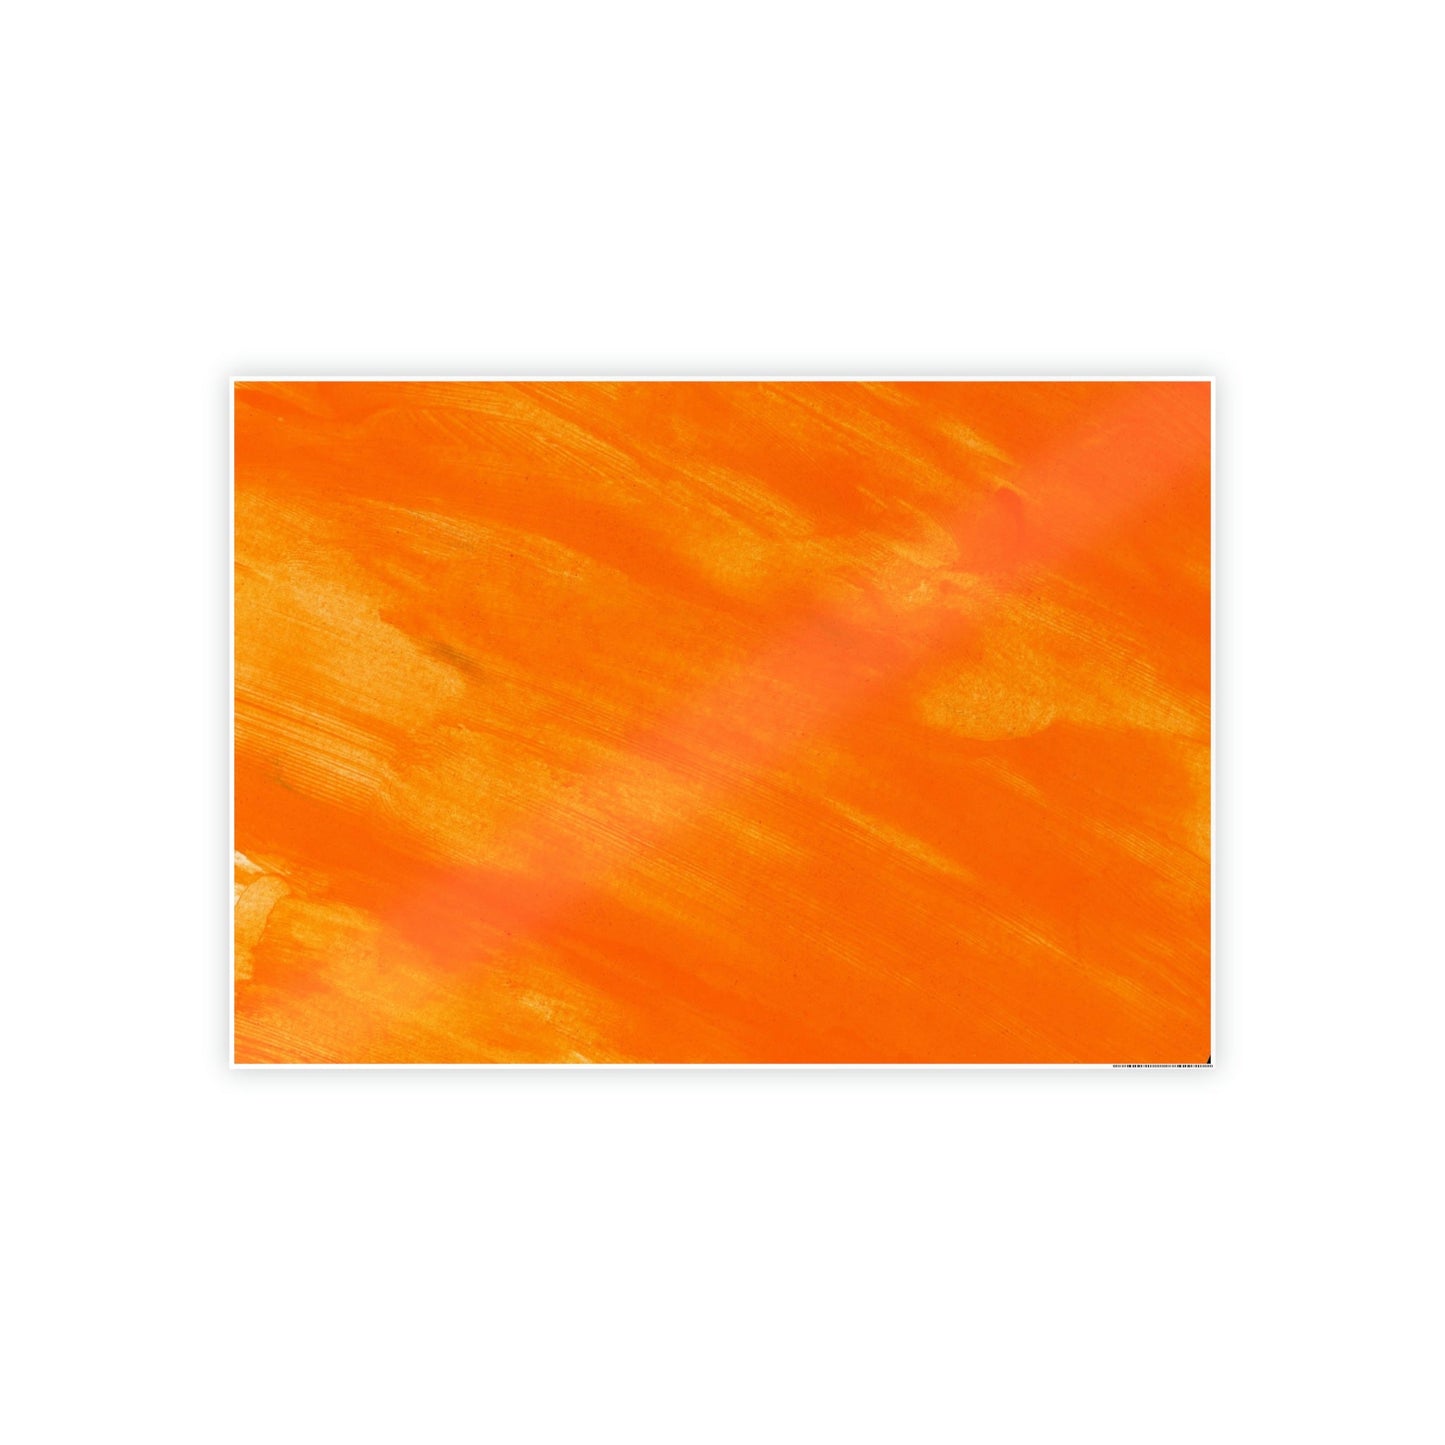 Tangy Tones: Orange Wall Art on Vibrant Framed Poster & Canvas